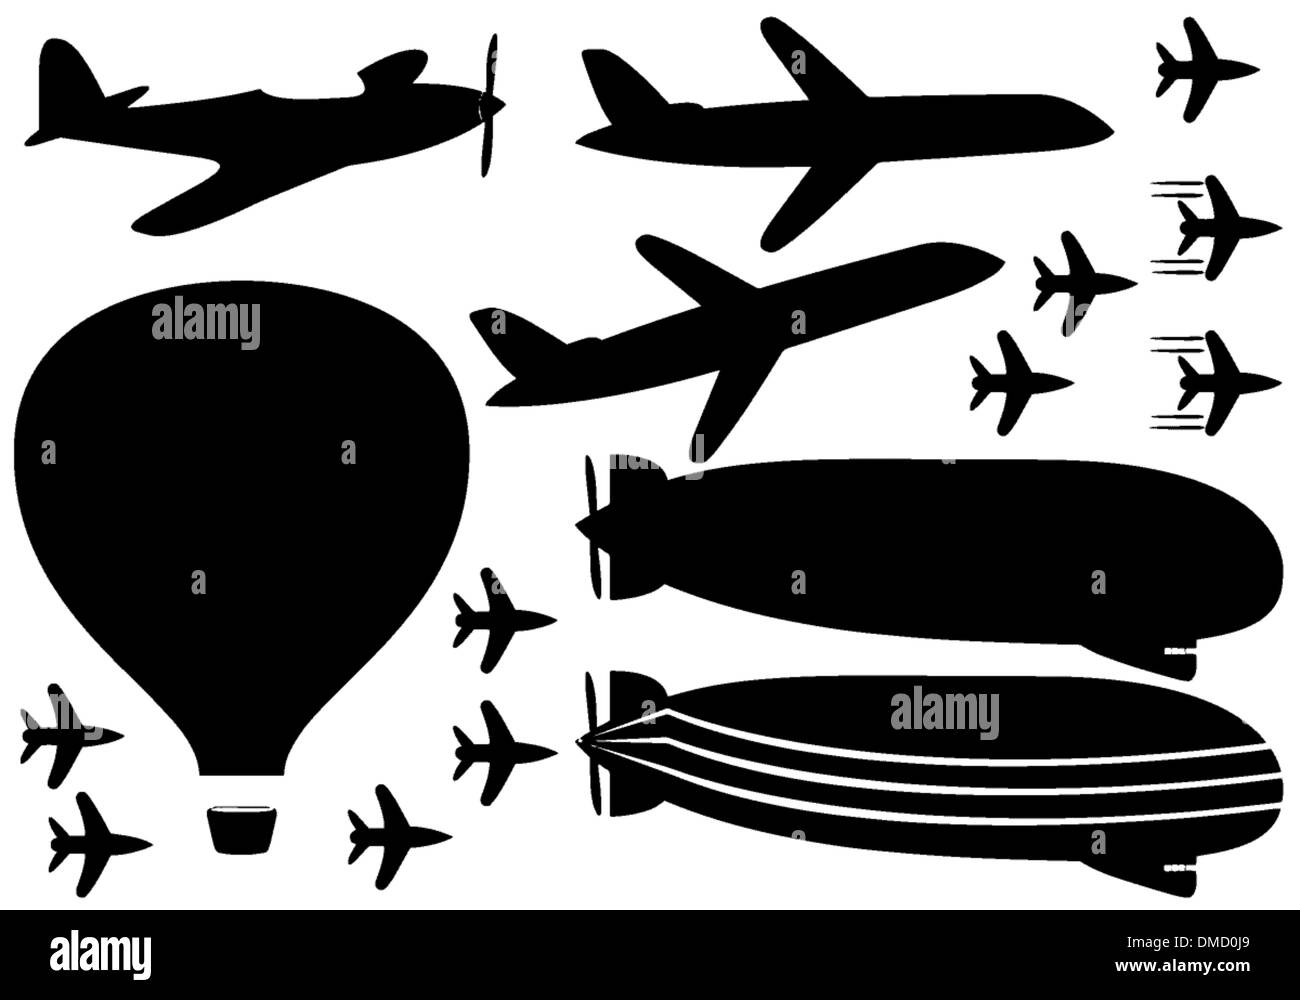 Fly vehicles Stock Vector